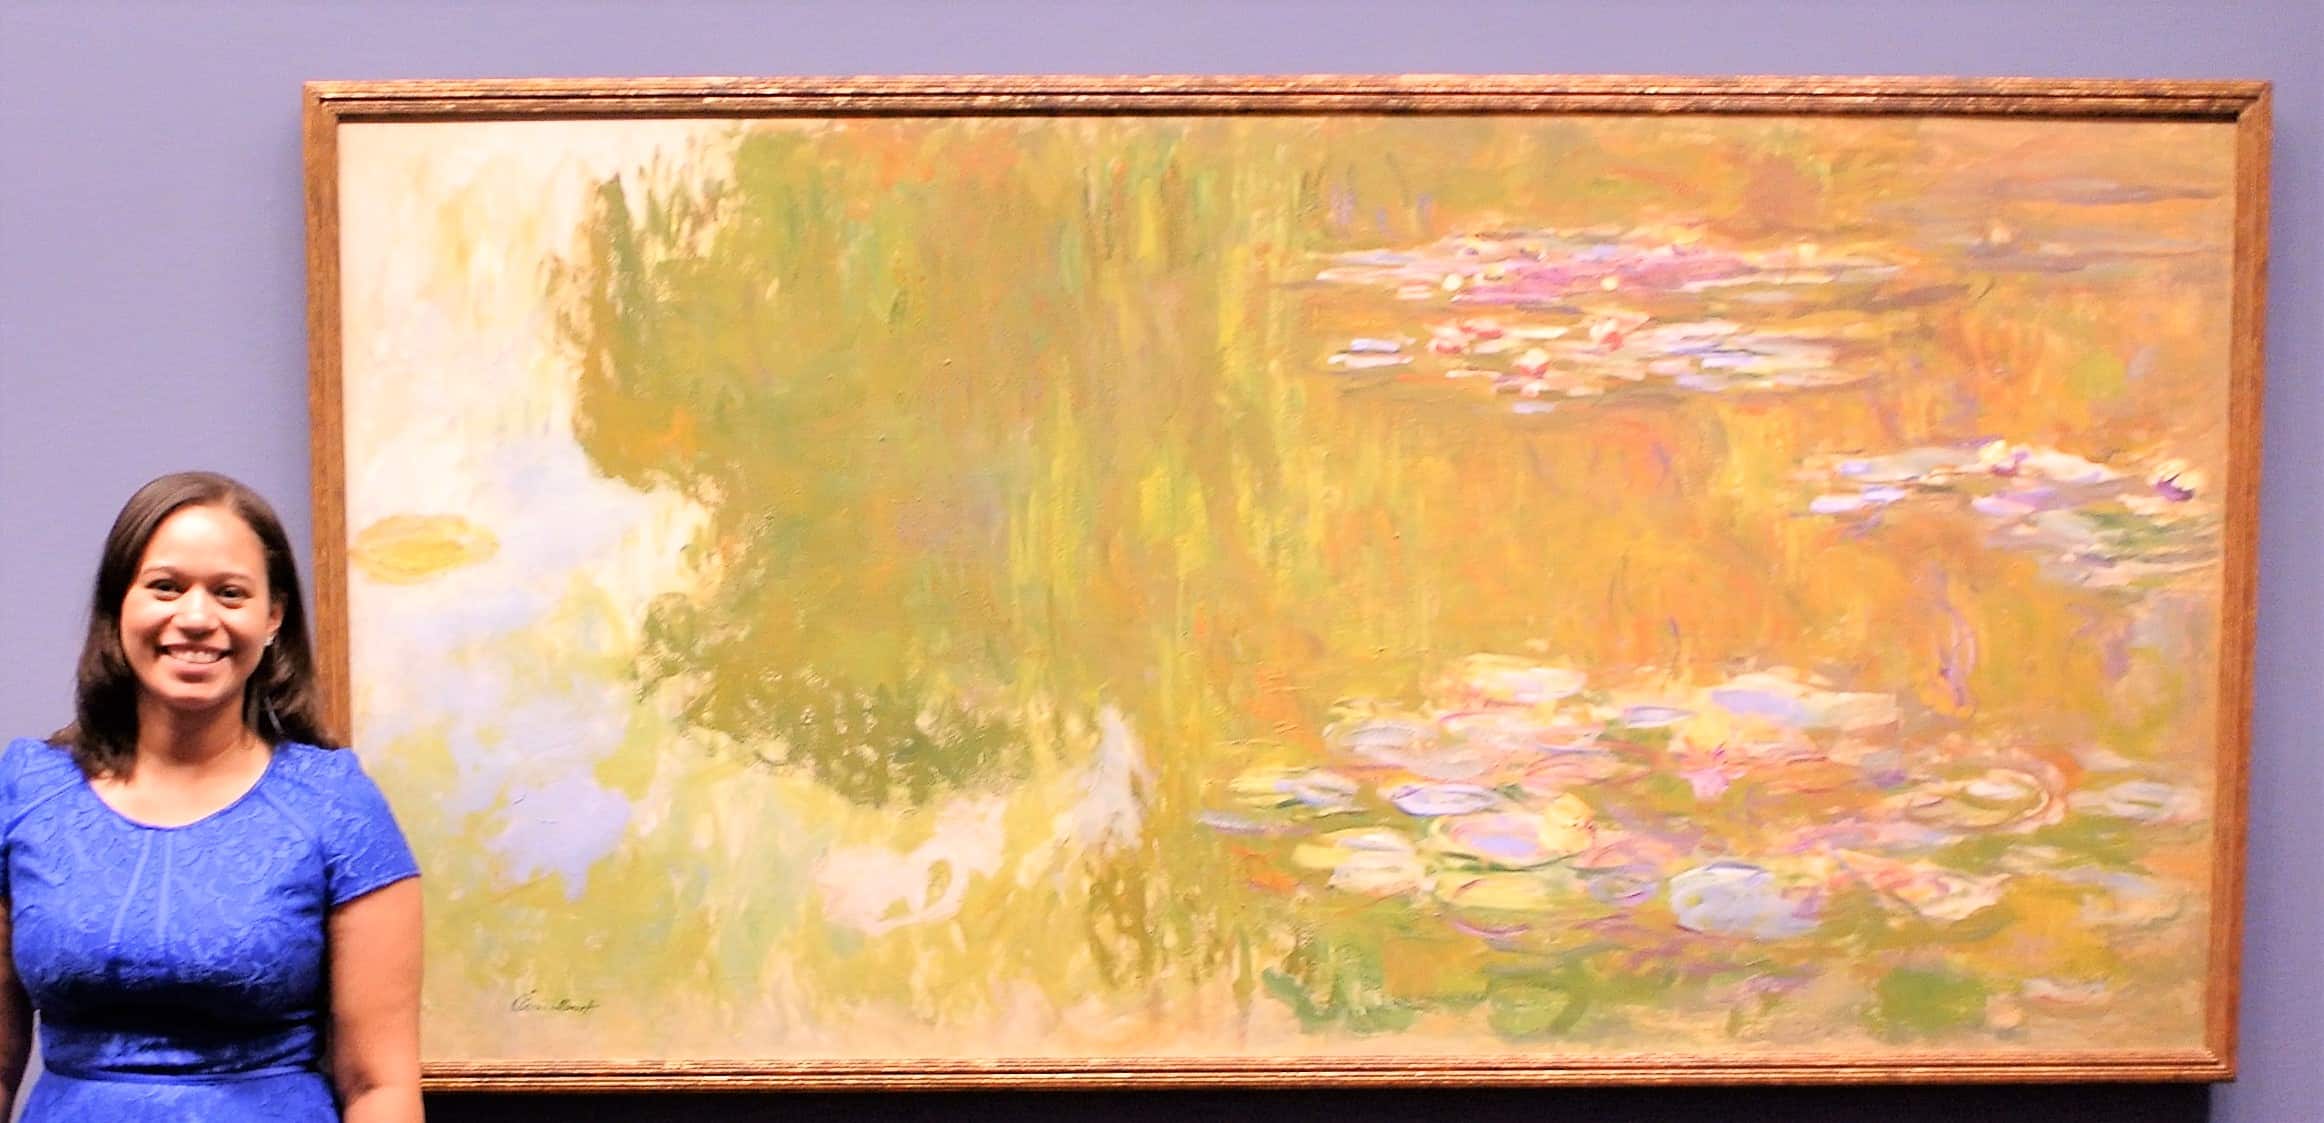 The Water Lily Pond - Claud Monet - 1917-19